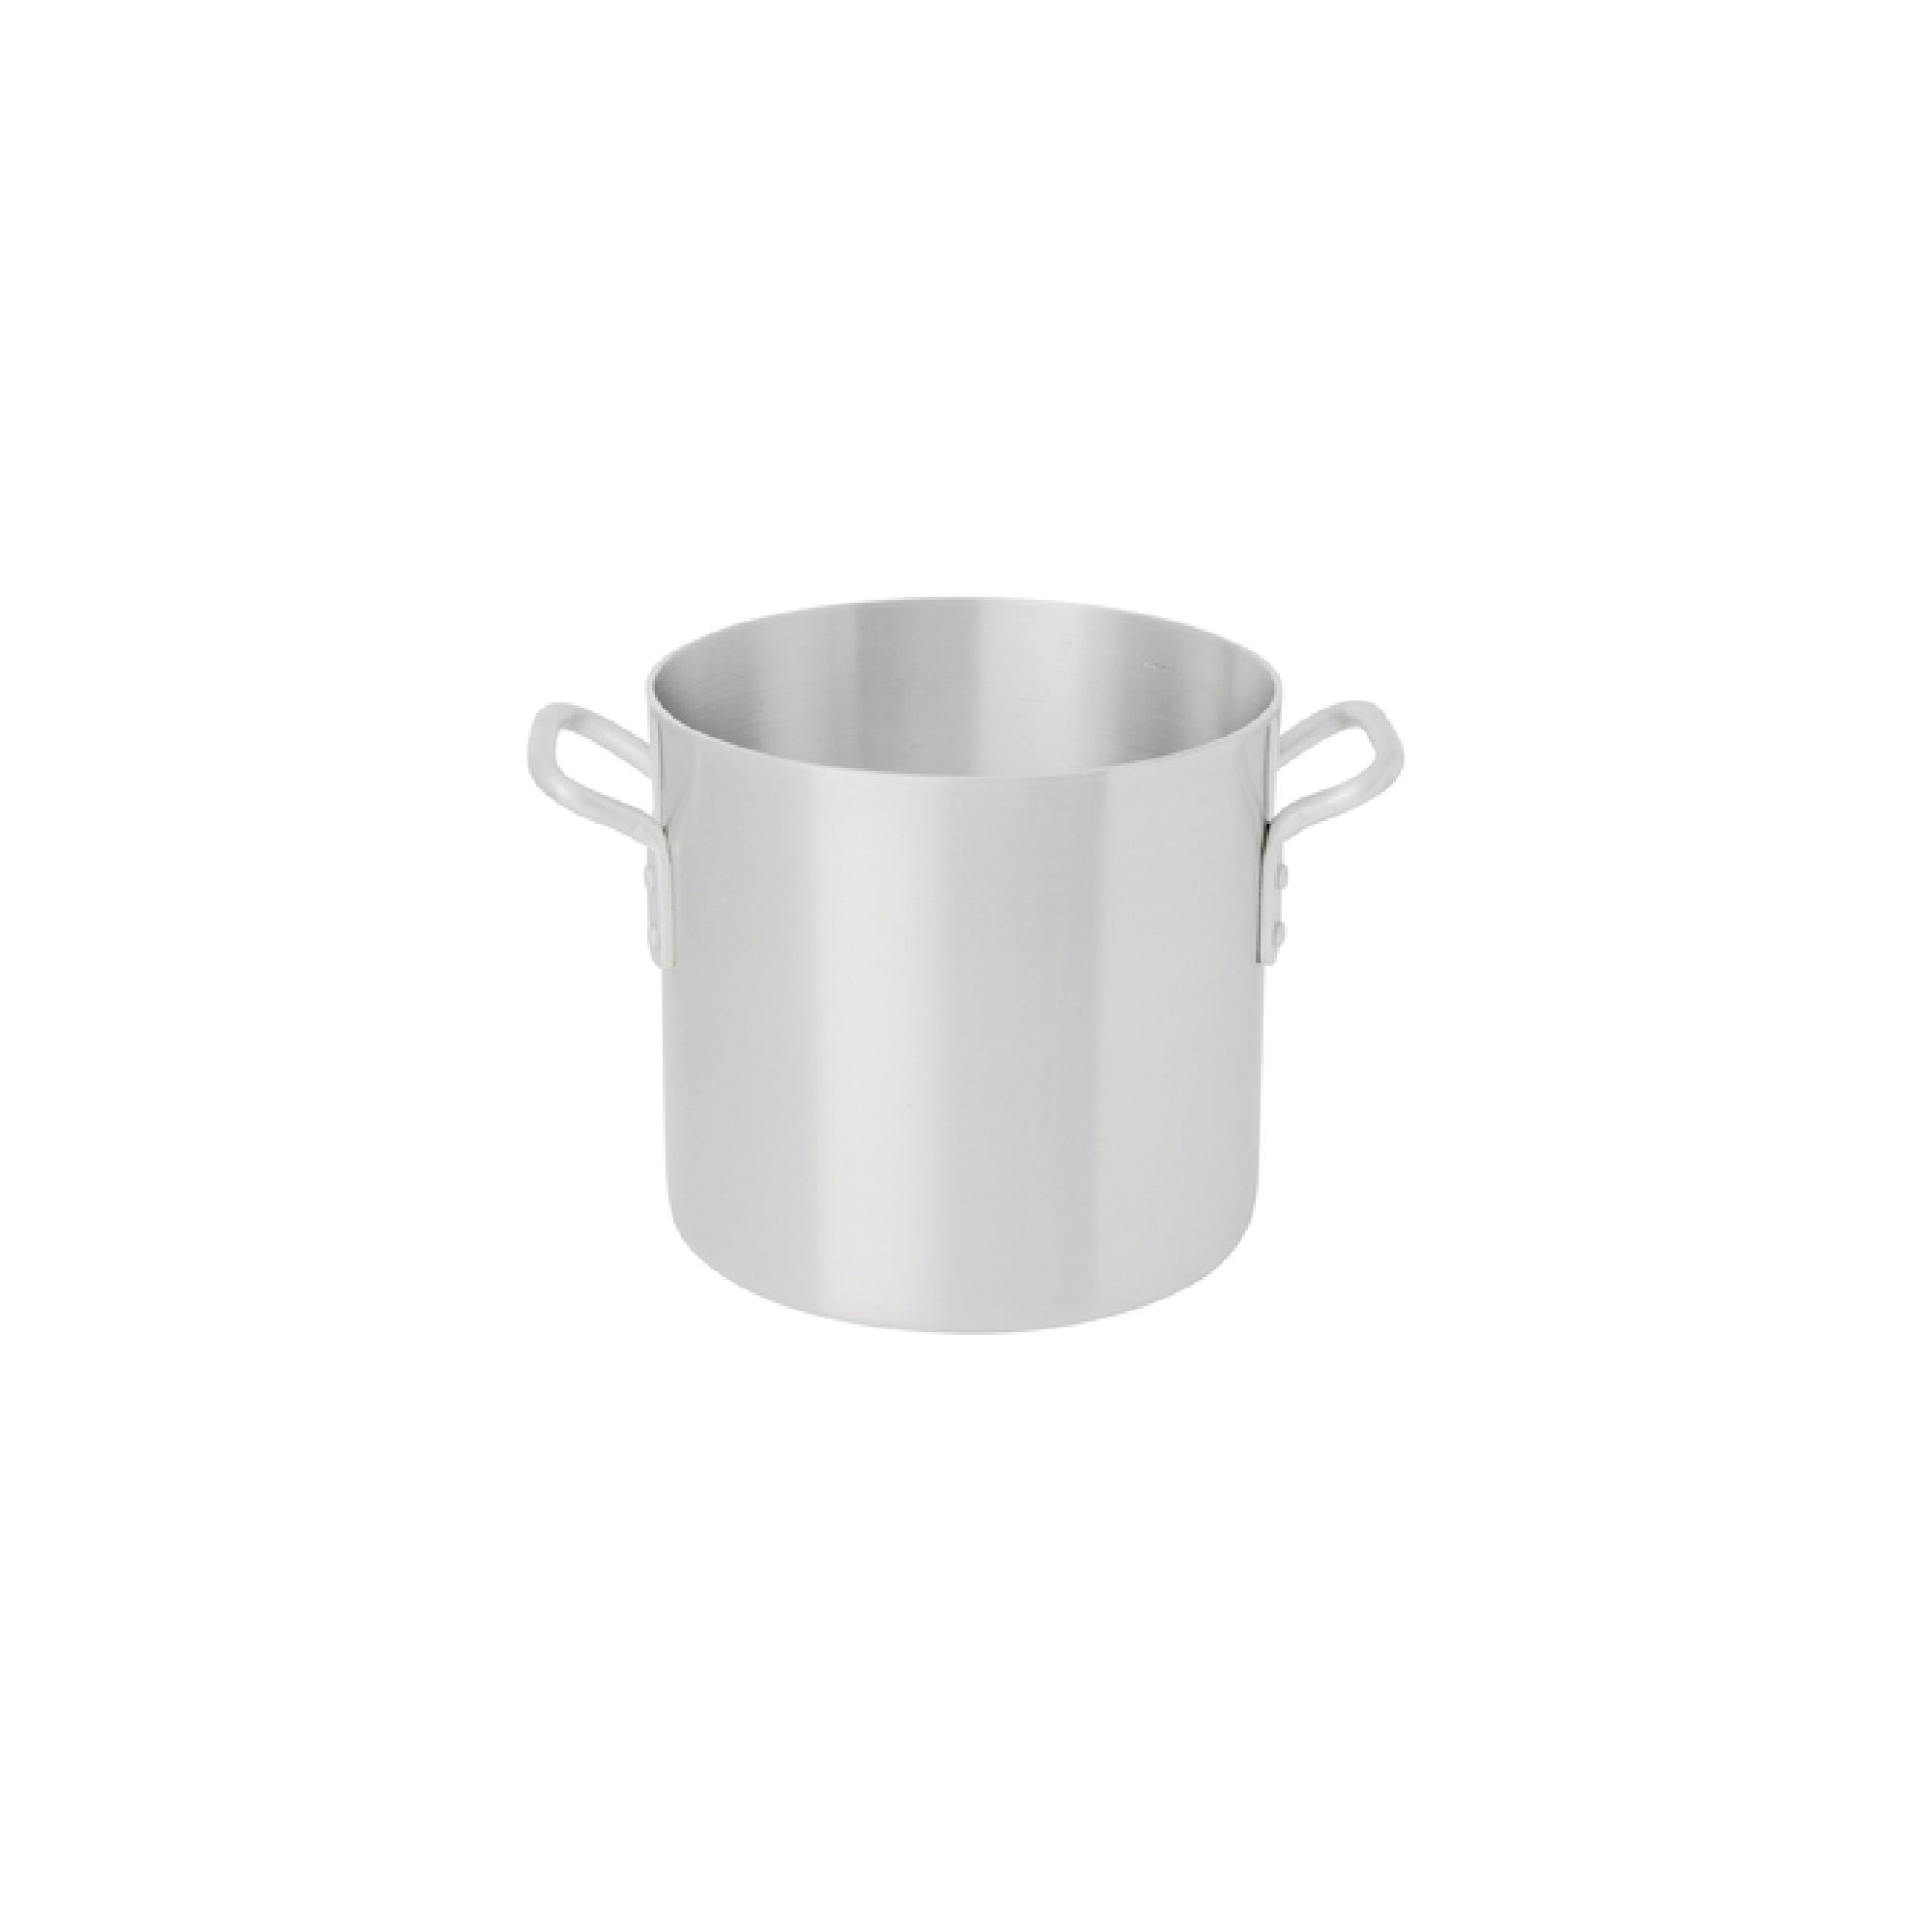 Winware Stainless Steel 24 Quart Stock Pot with Cover,Silver